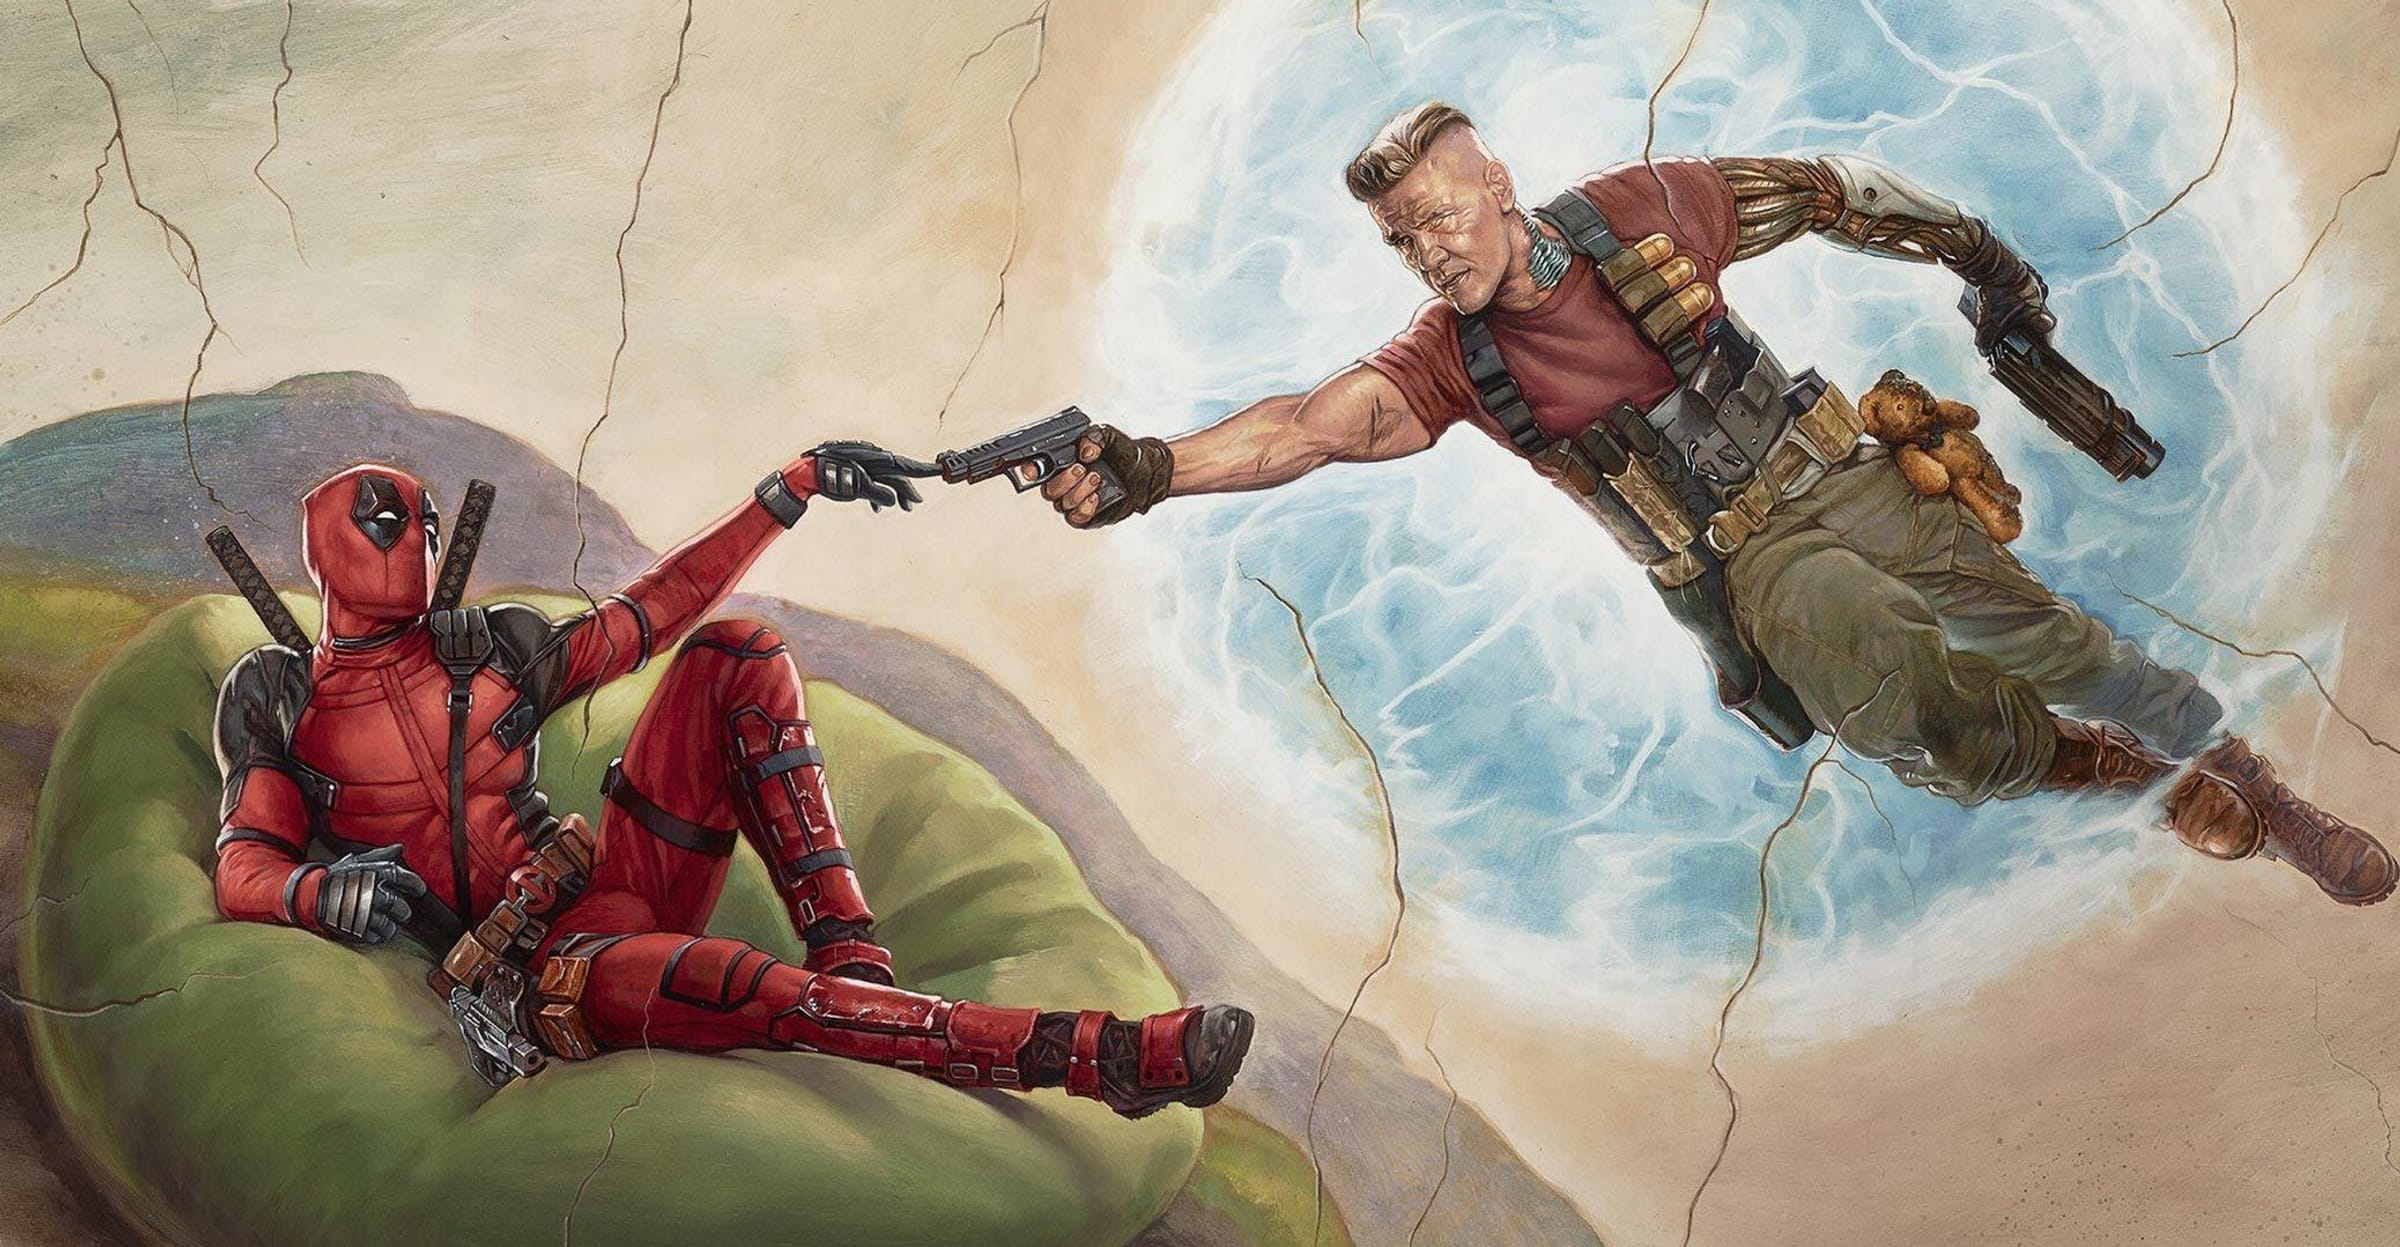 13 coolest Deadpool Easter eggs, cameos and in-jokes